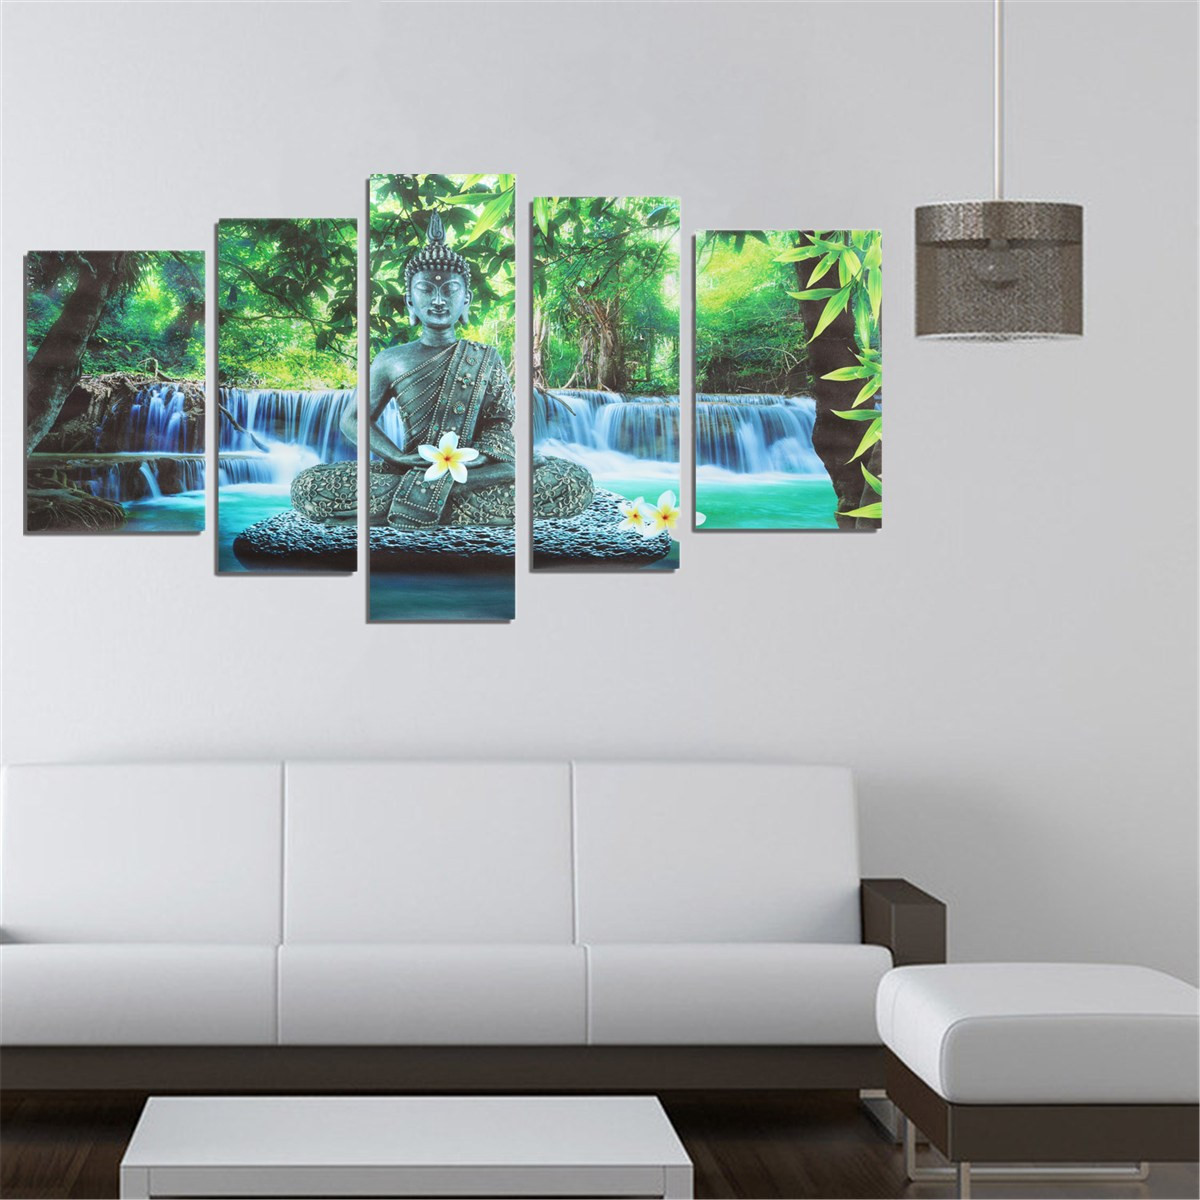 

5PCS Buddha Frameless Canvas Print Mural Painting Wall Picture Home Decoration